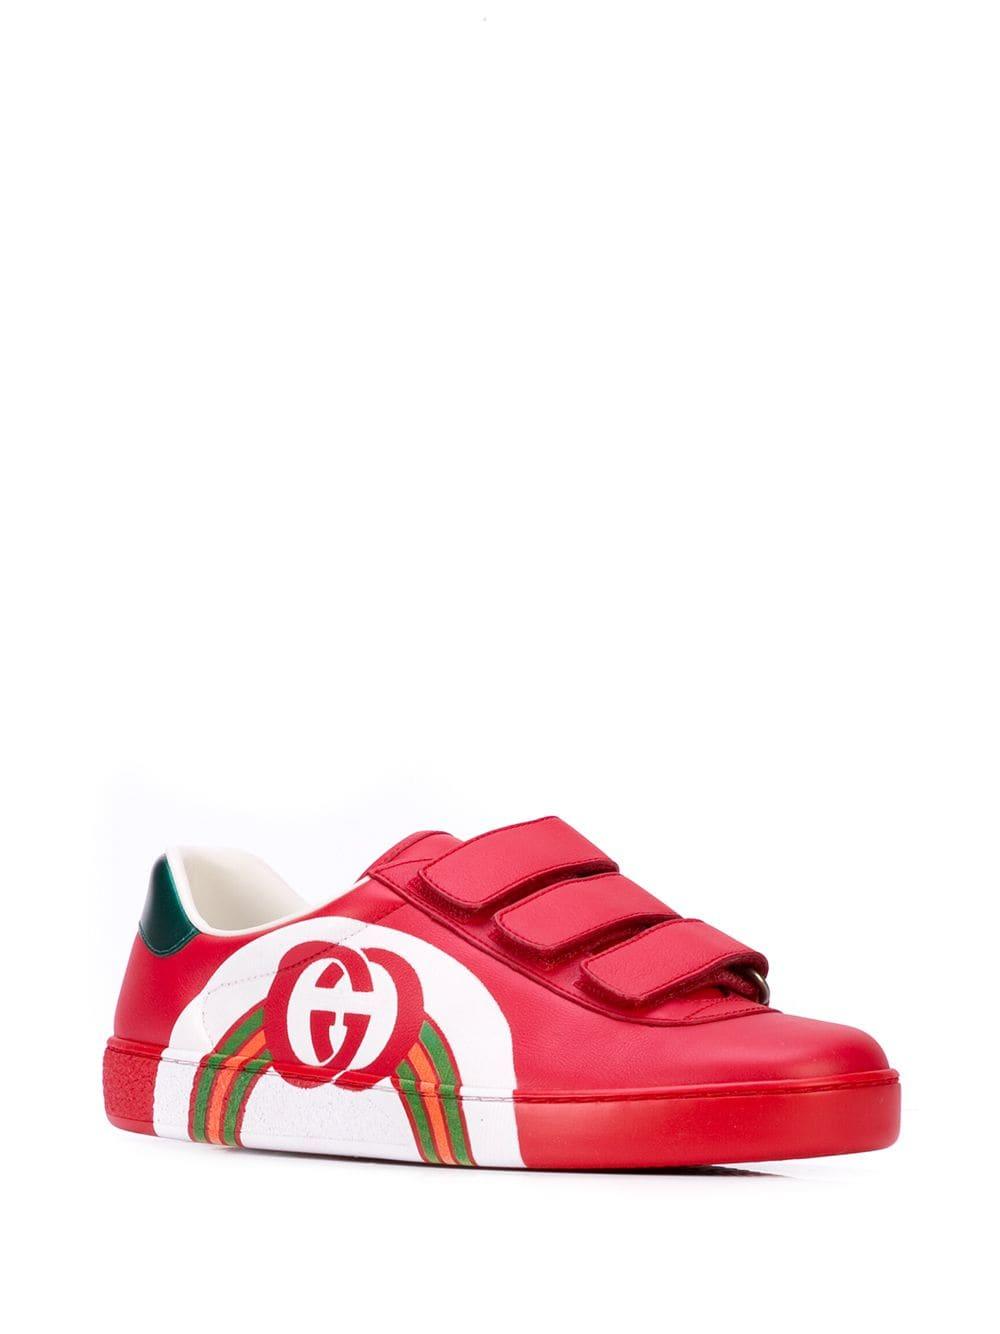 gucci shoes rainbow